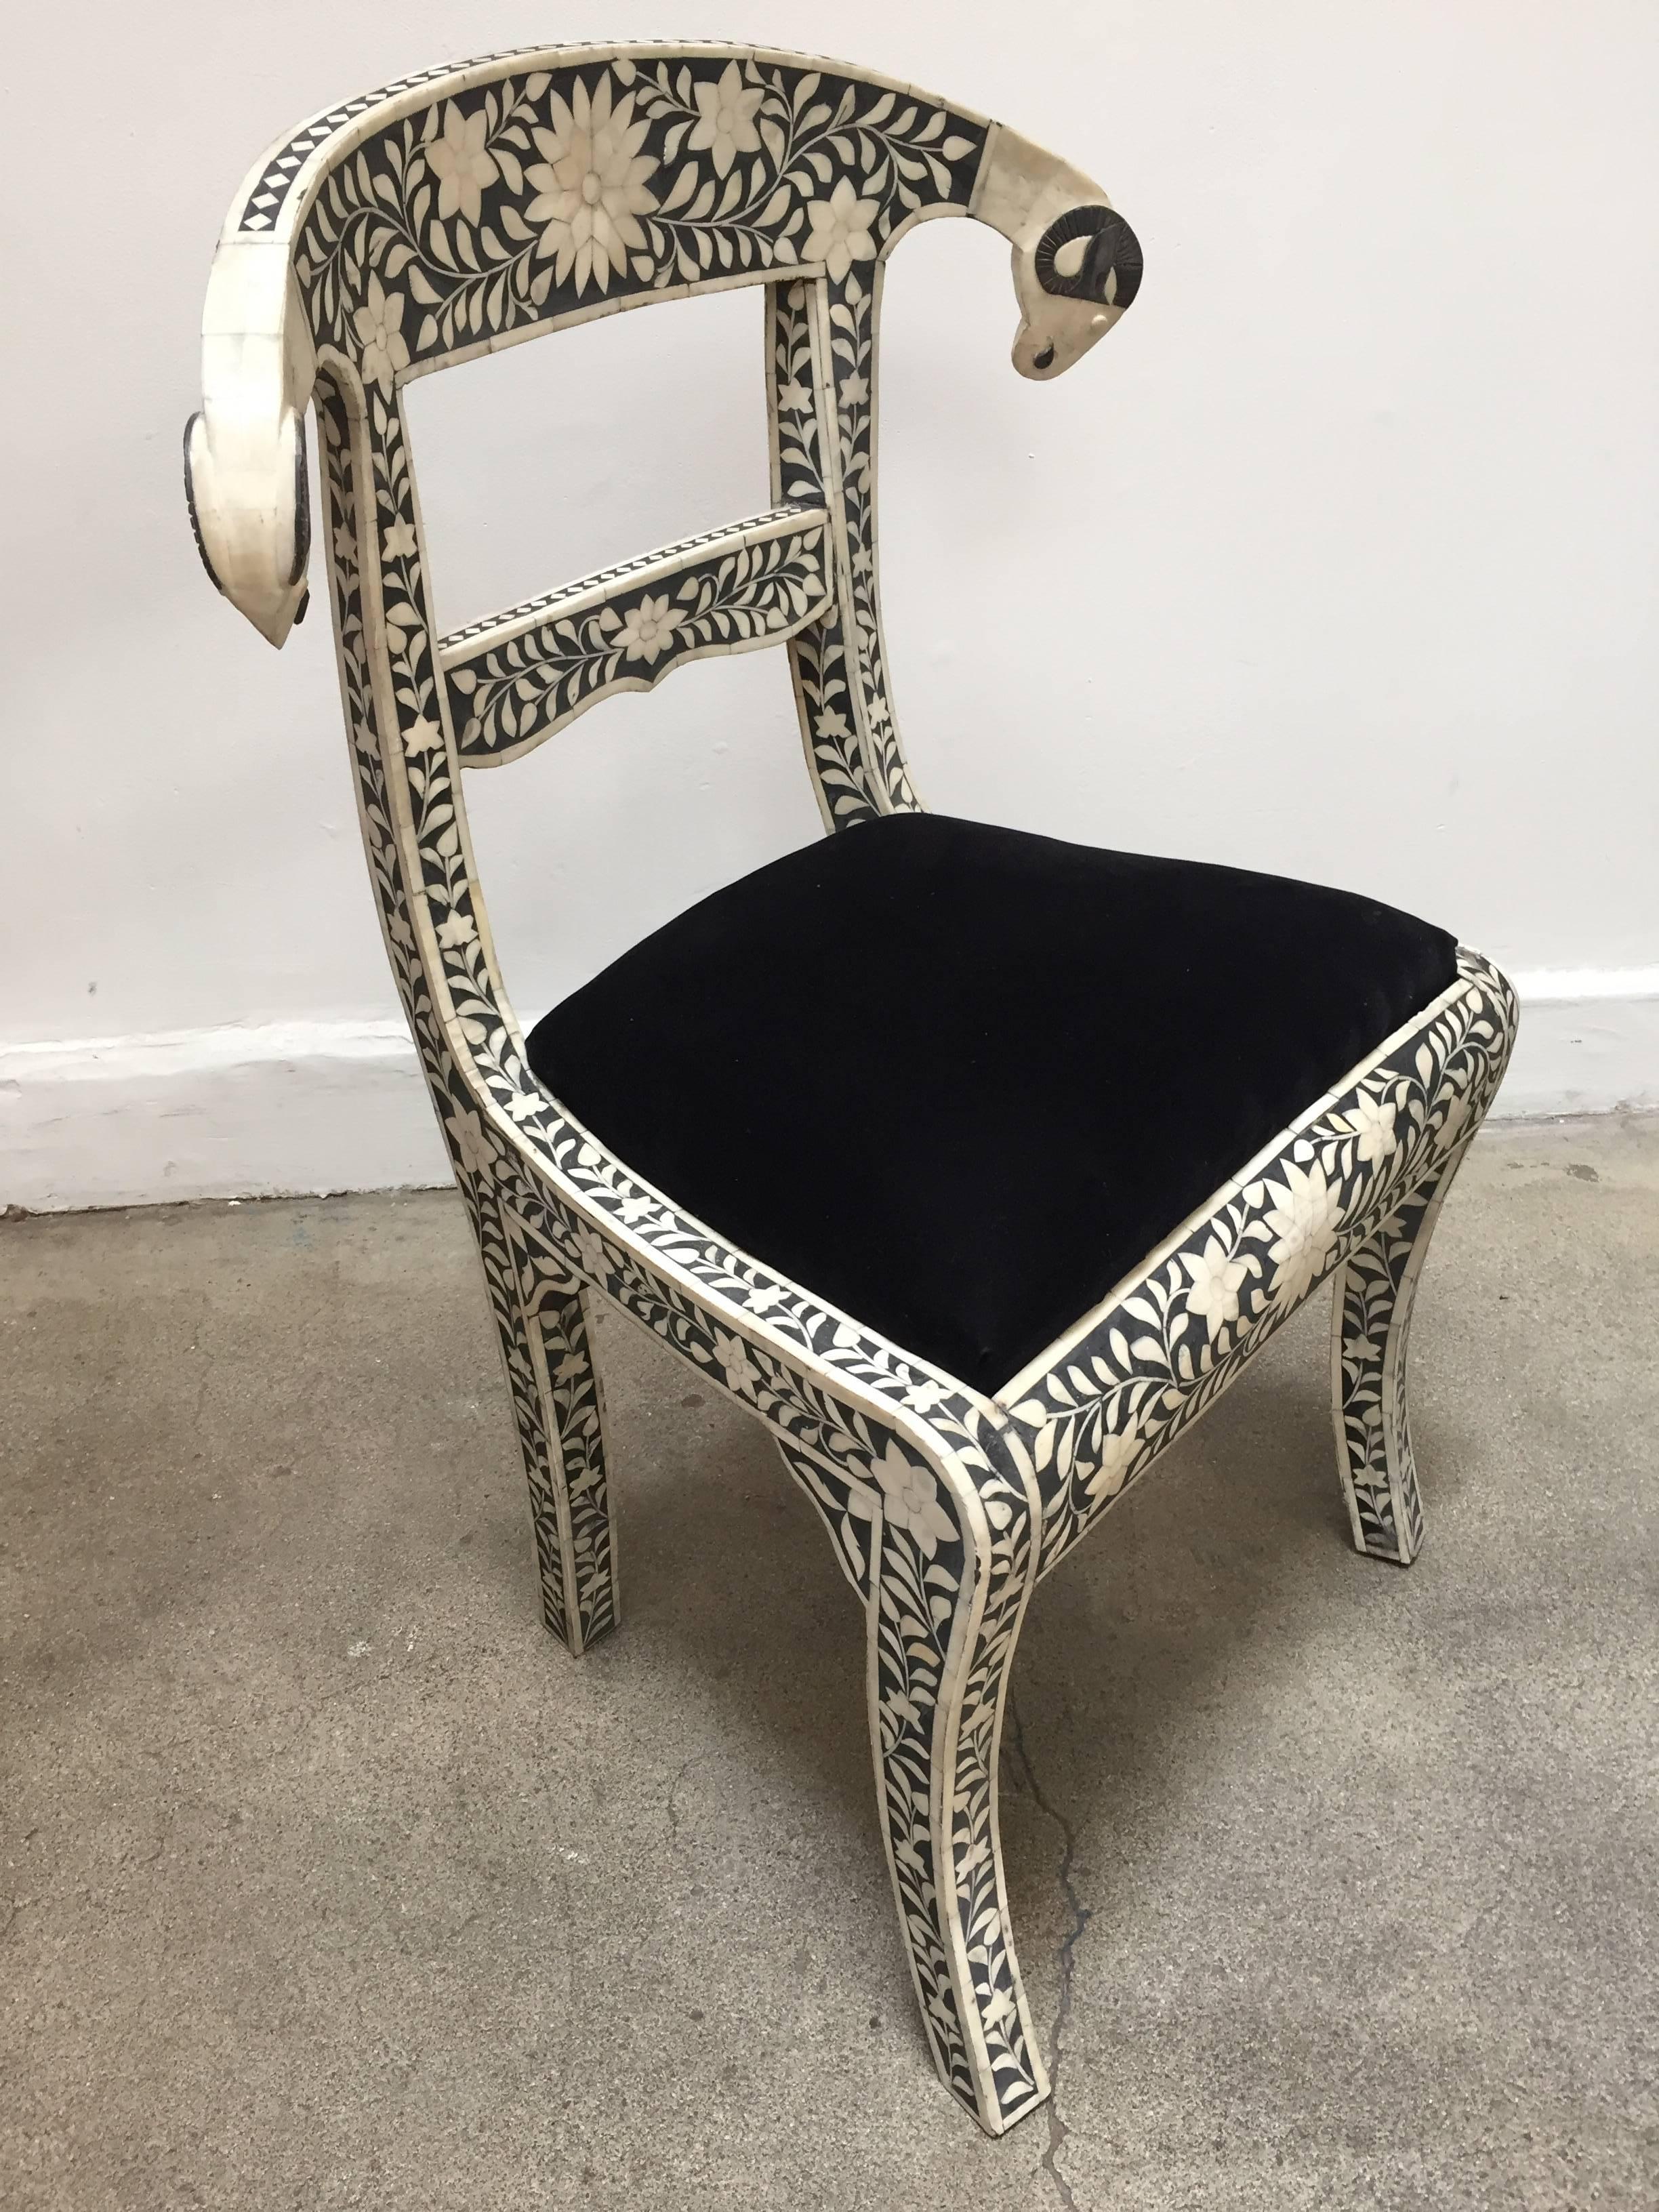 Anglo-Indian black and white dowry side chair with ram's head.
This stunning chair feature a wooden frame inlaid with intricate and detailed floral design in white and black color and scrolling ram's heads finish.
Seat is upholstered in a black